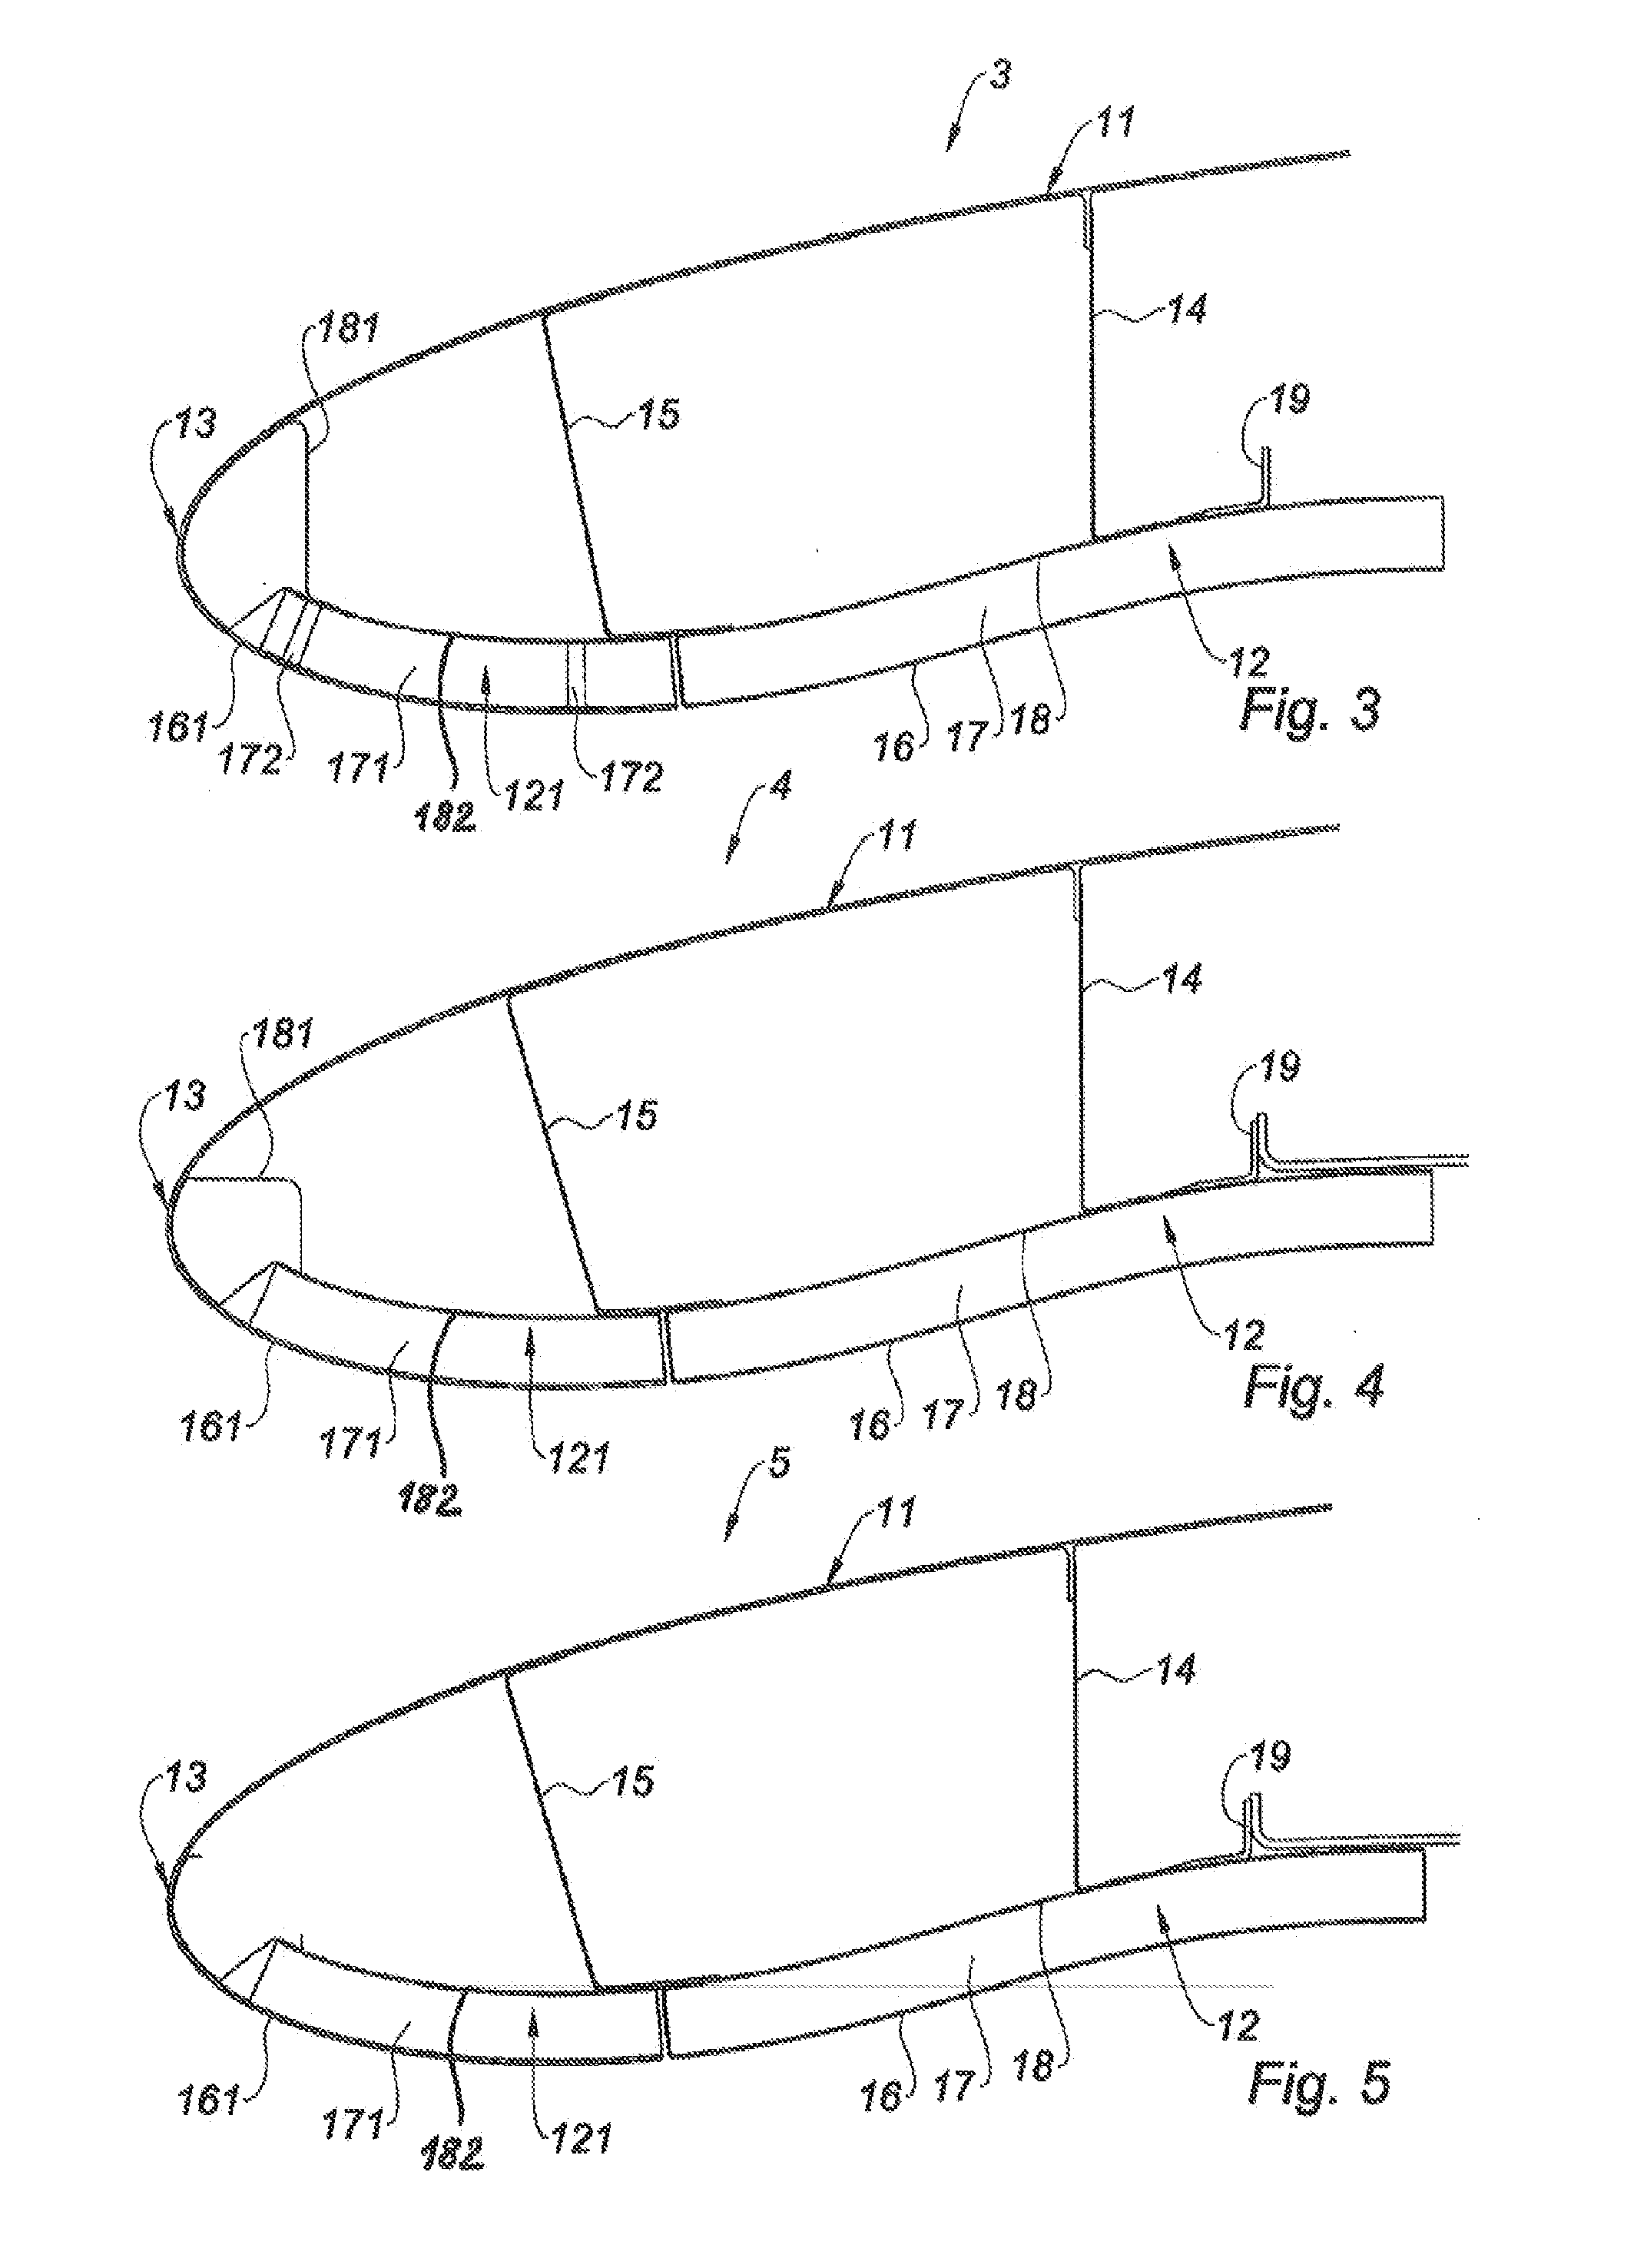 Air intake structure for turbojet engine nacelle